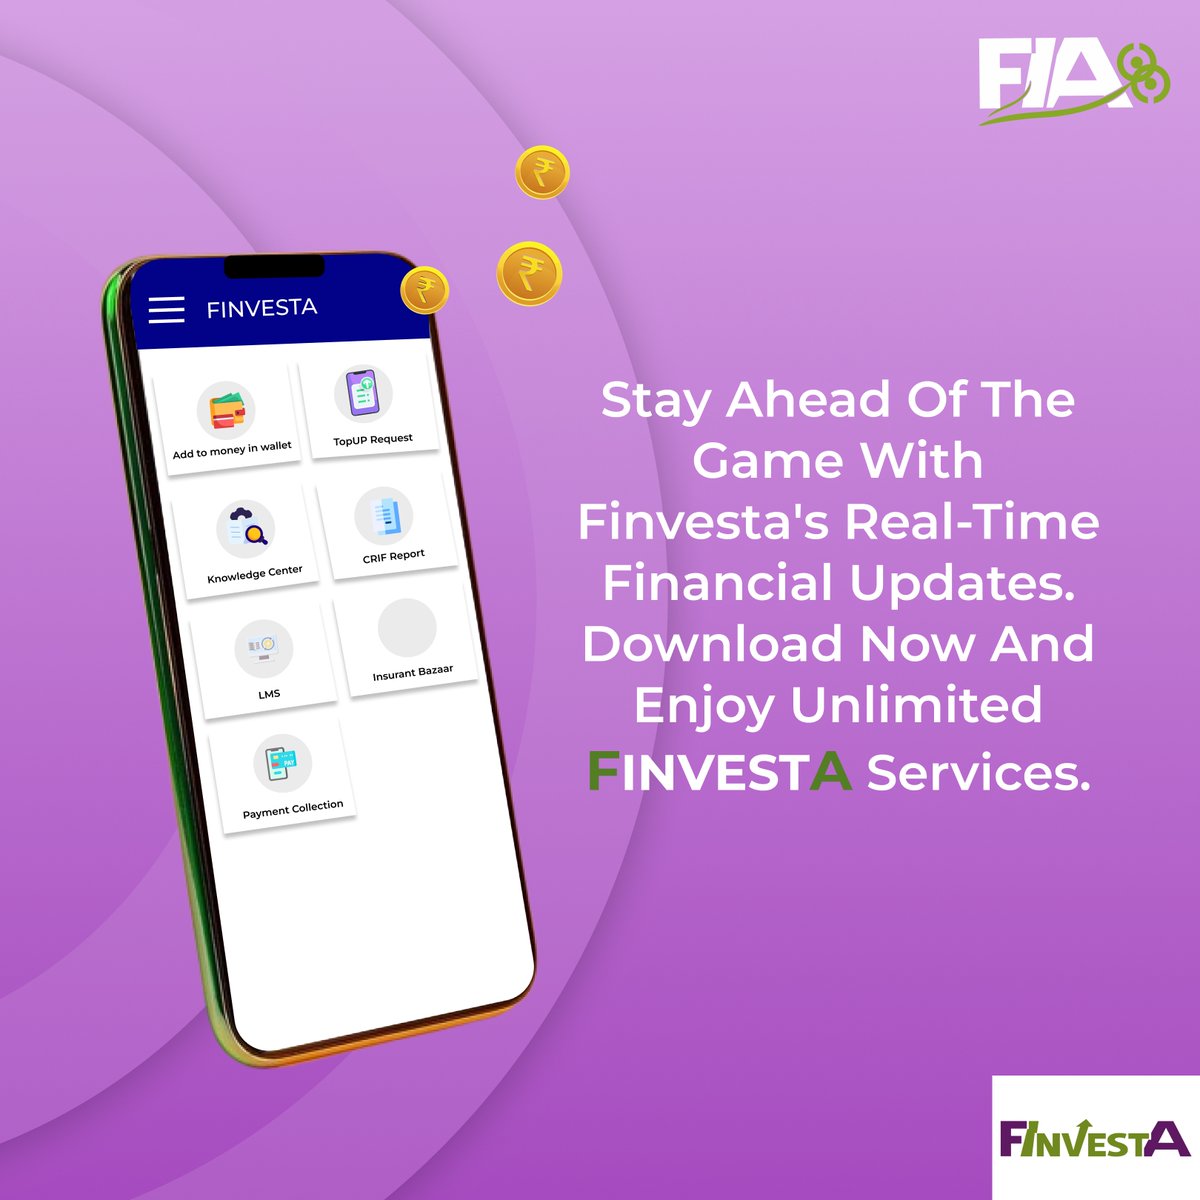 Join the Finvesta family today and let's turn your pocket change into a treasure trove of financial success! Link:play.google.com/store/apps/det… #FIA #FINVESTA #Fintech #DigitalFinance #PaymentSolutions #AIinFinance #Neobank #OpenBanking #FintechInnovation #MobilePayments